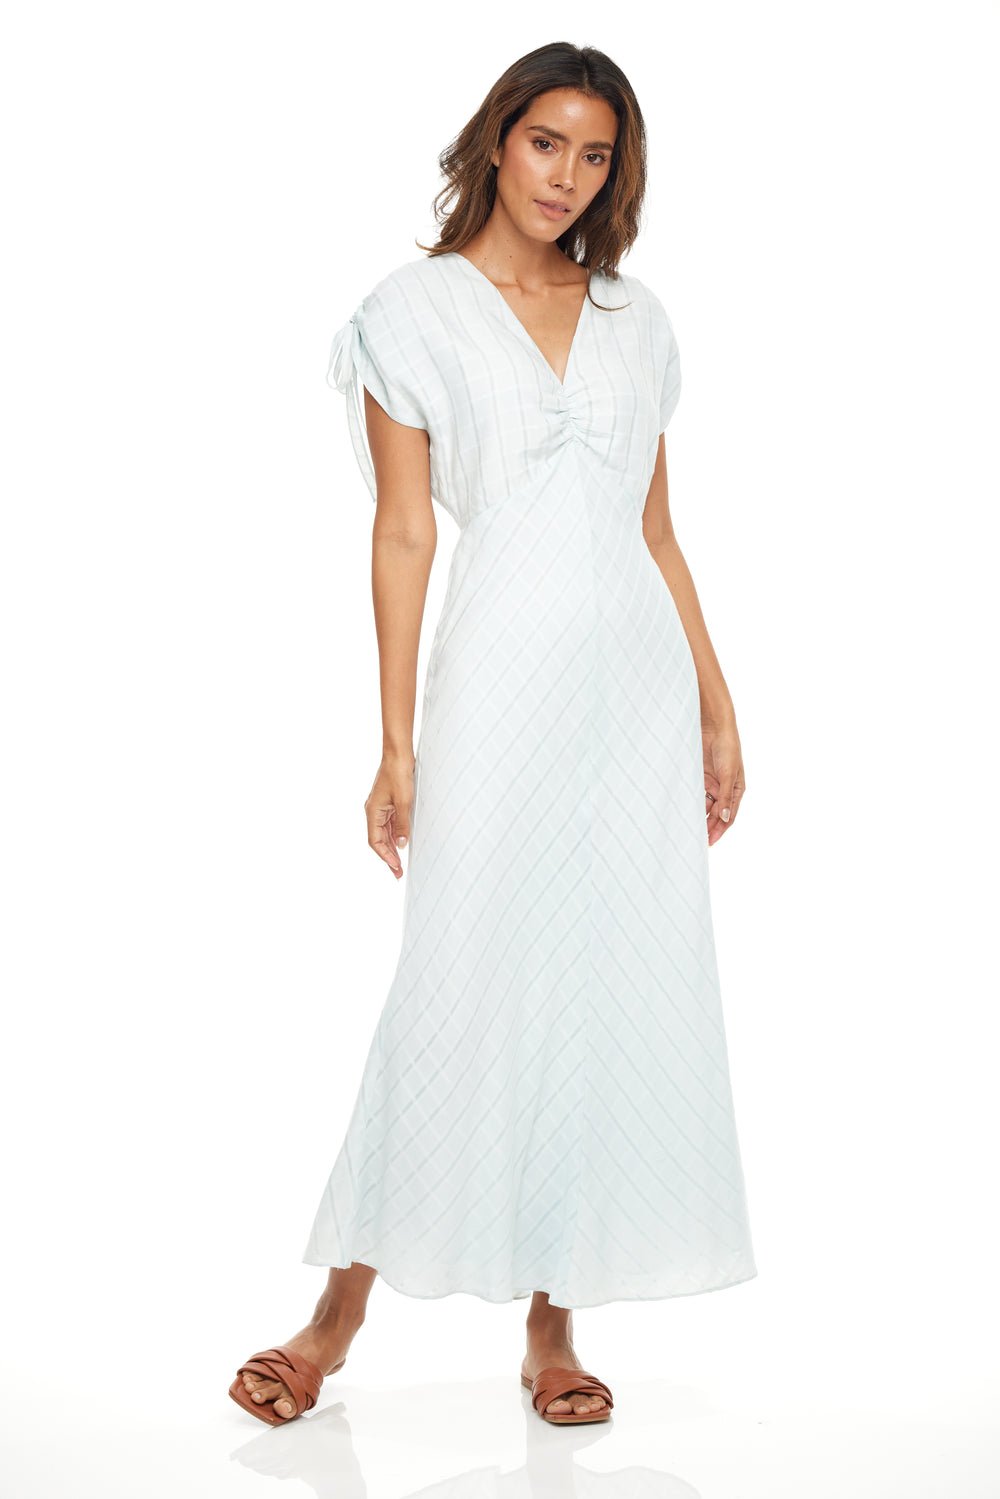 Anna Cate - Angelina Maxi S/S Dress - Soft Blue Plaid - Shorely Chic Boutique